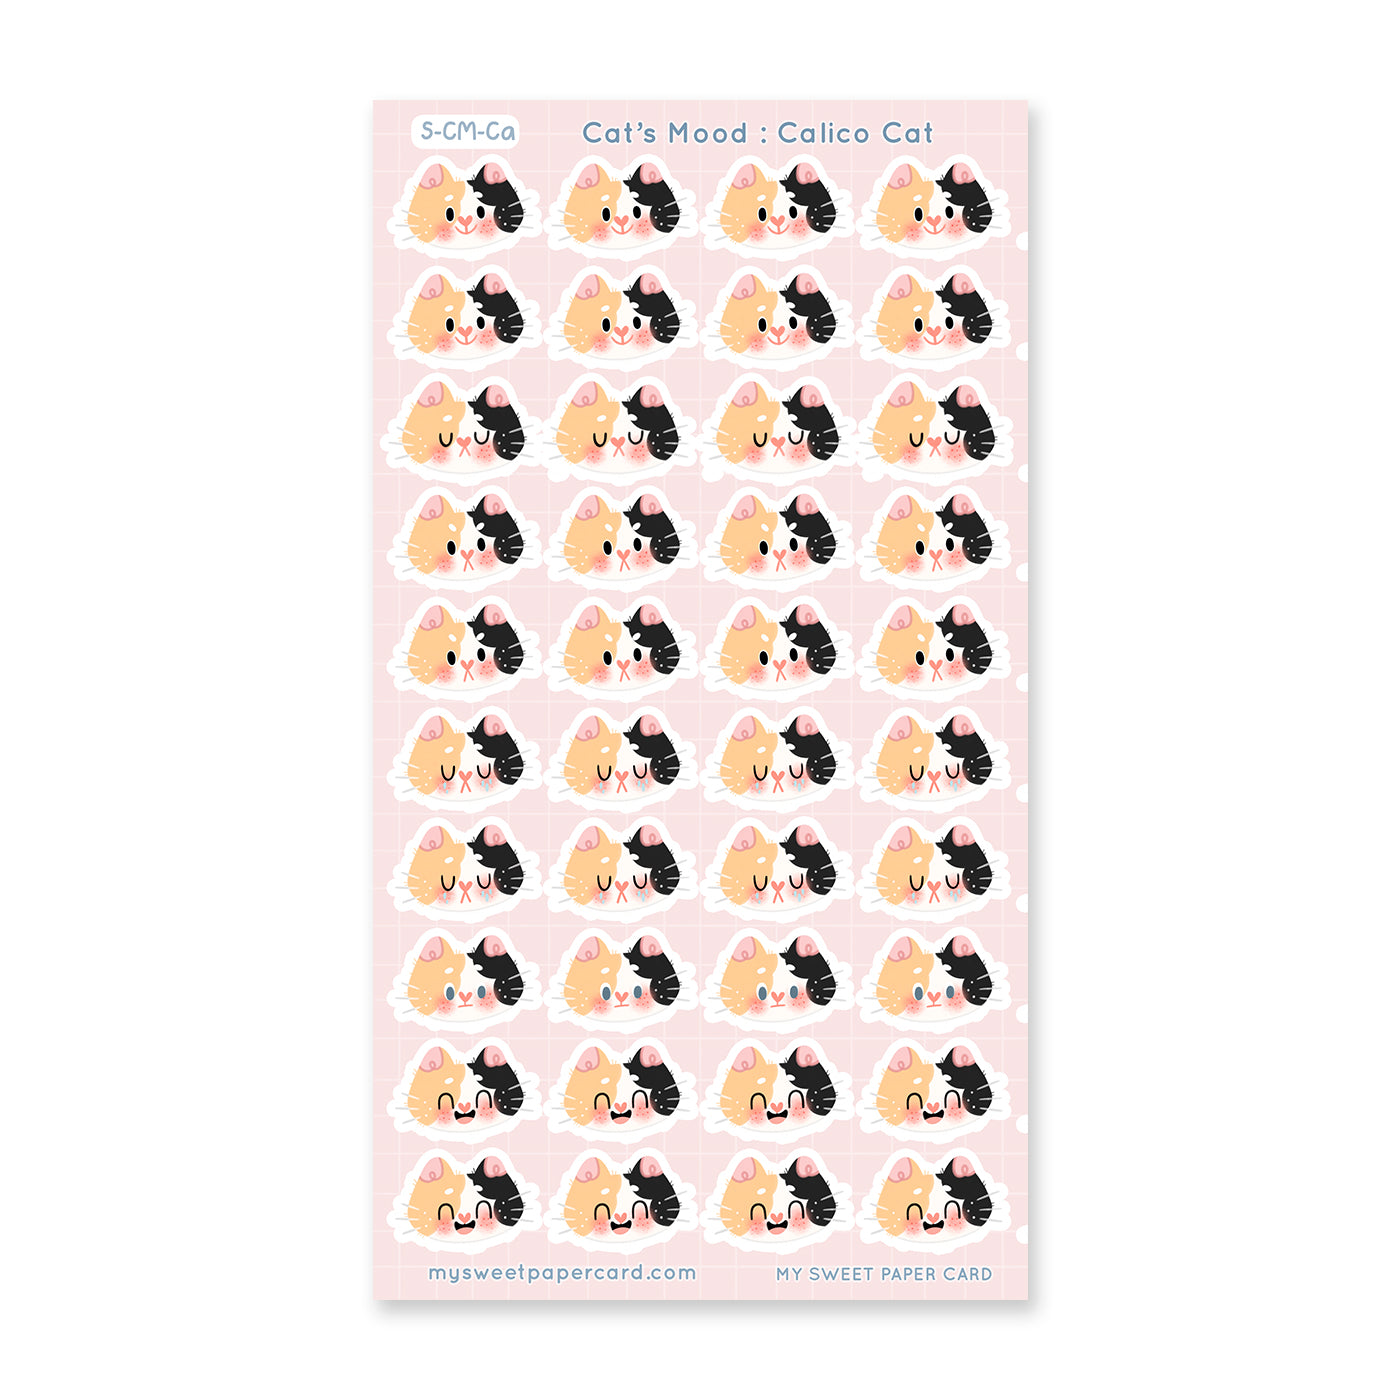 calico cat stickers sheet with different moods